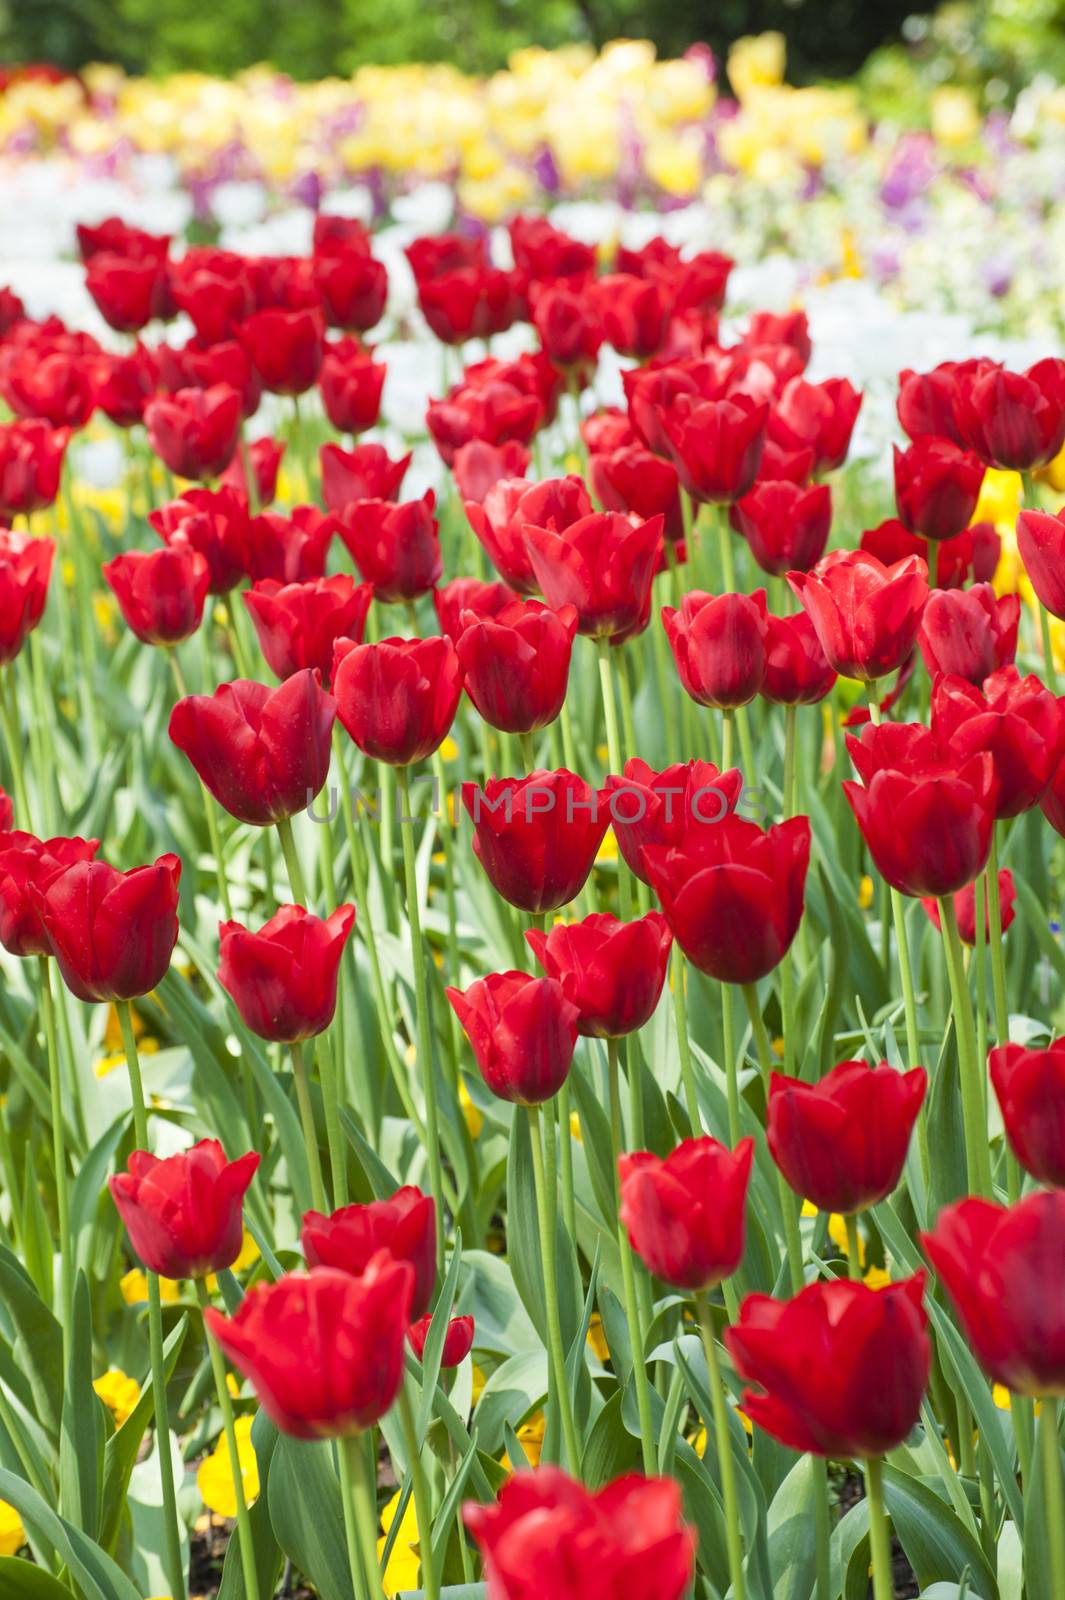 Nnice red tulips by Alenmax